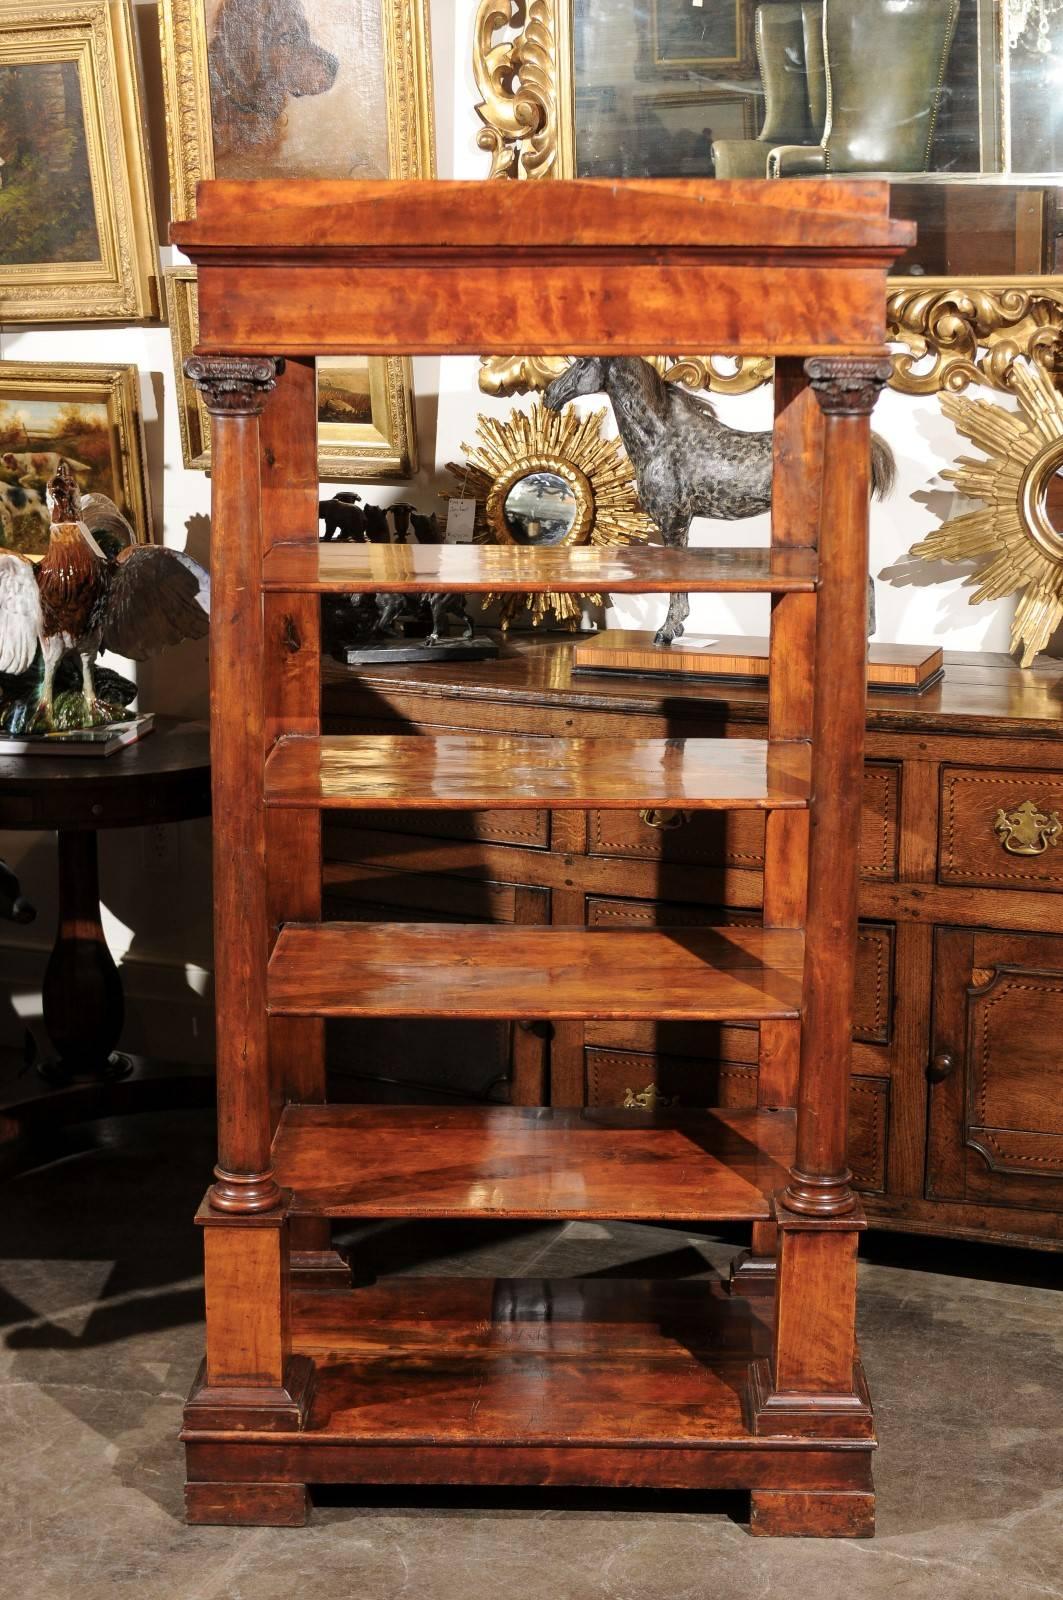 This exquisite early 19th century Austrian Biedermeier open bookcase features a deep honey colored fruitwood frame made of a rectangular top with triangular pediment, reminiscent of Greek temples, over five open shelves. The classical decorative